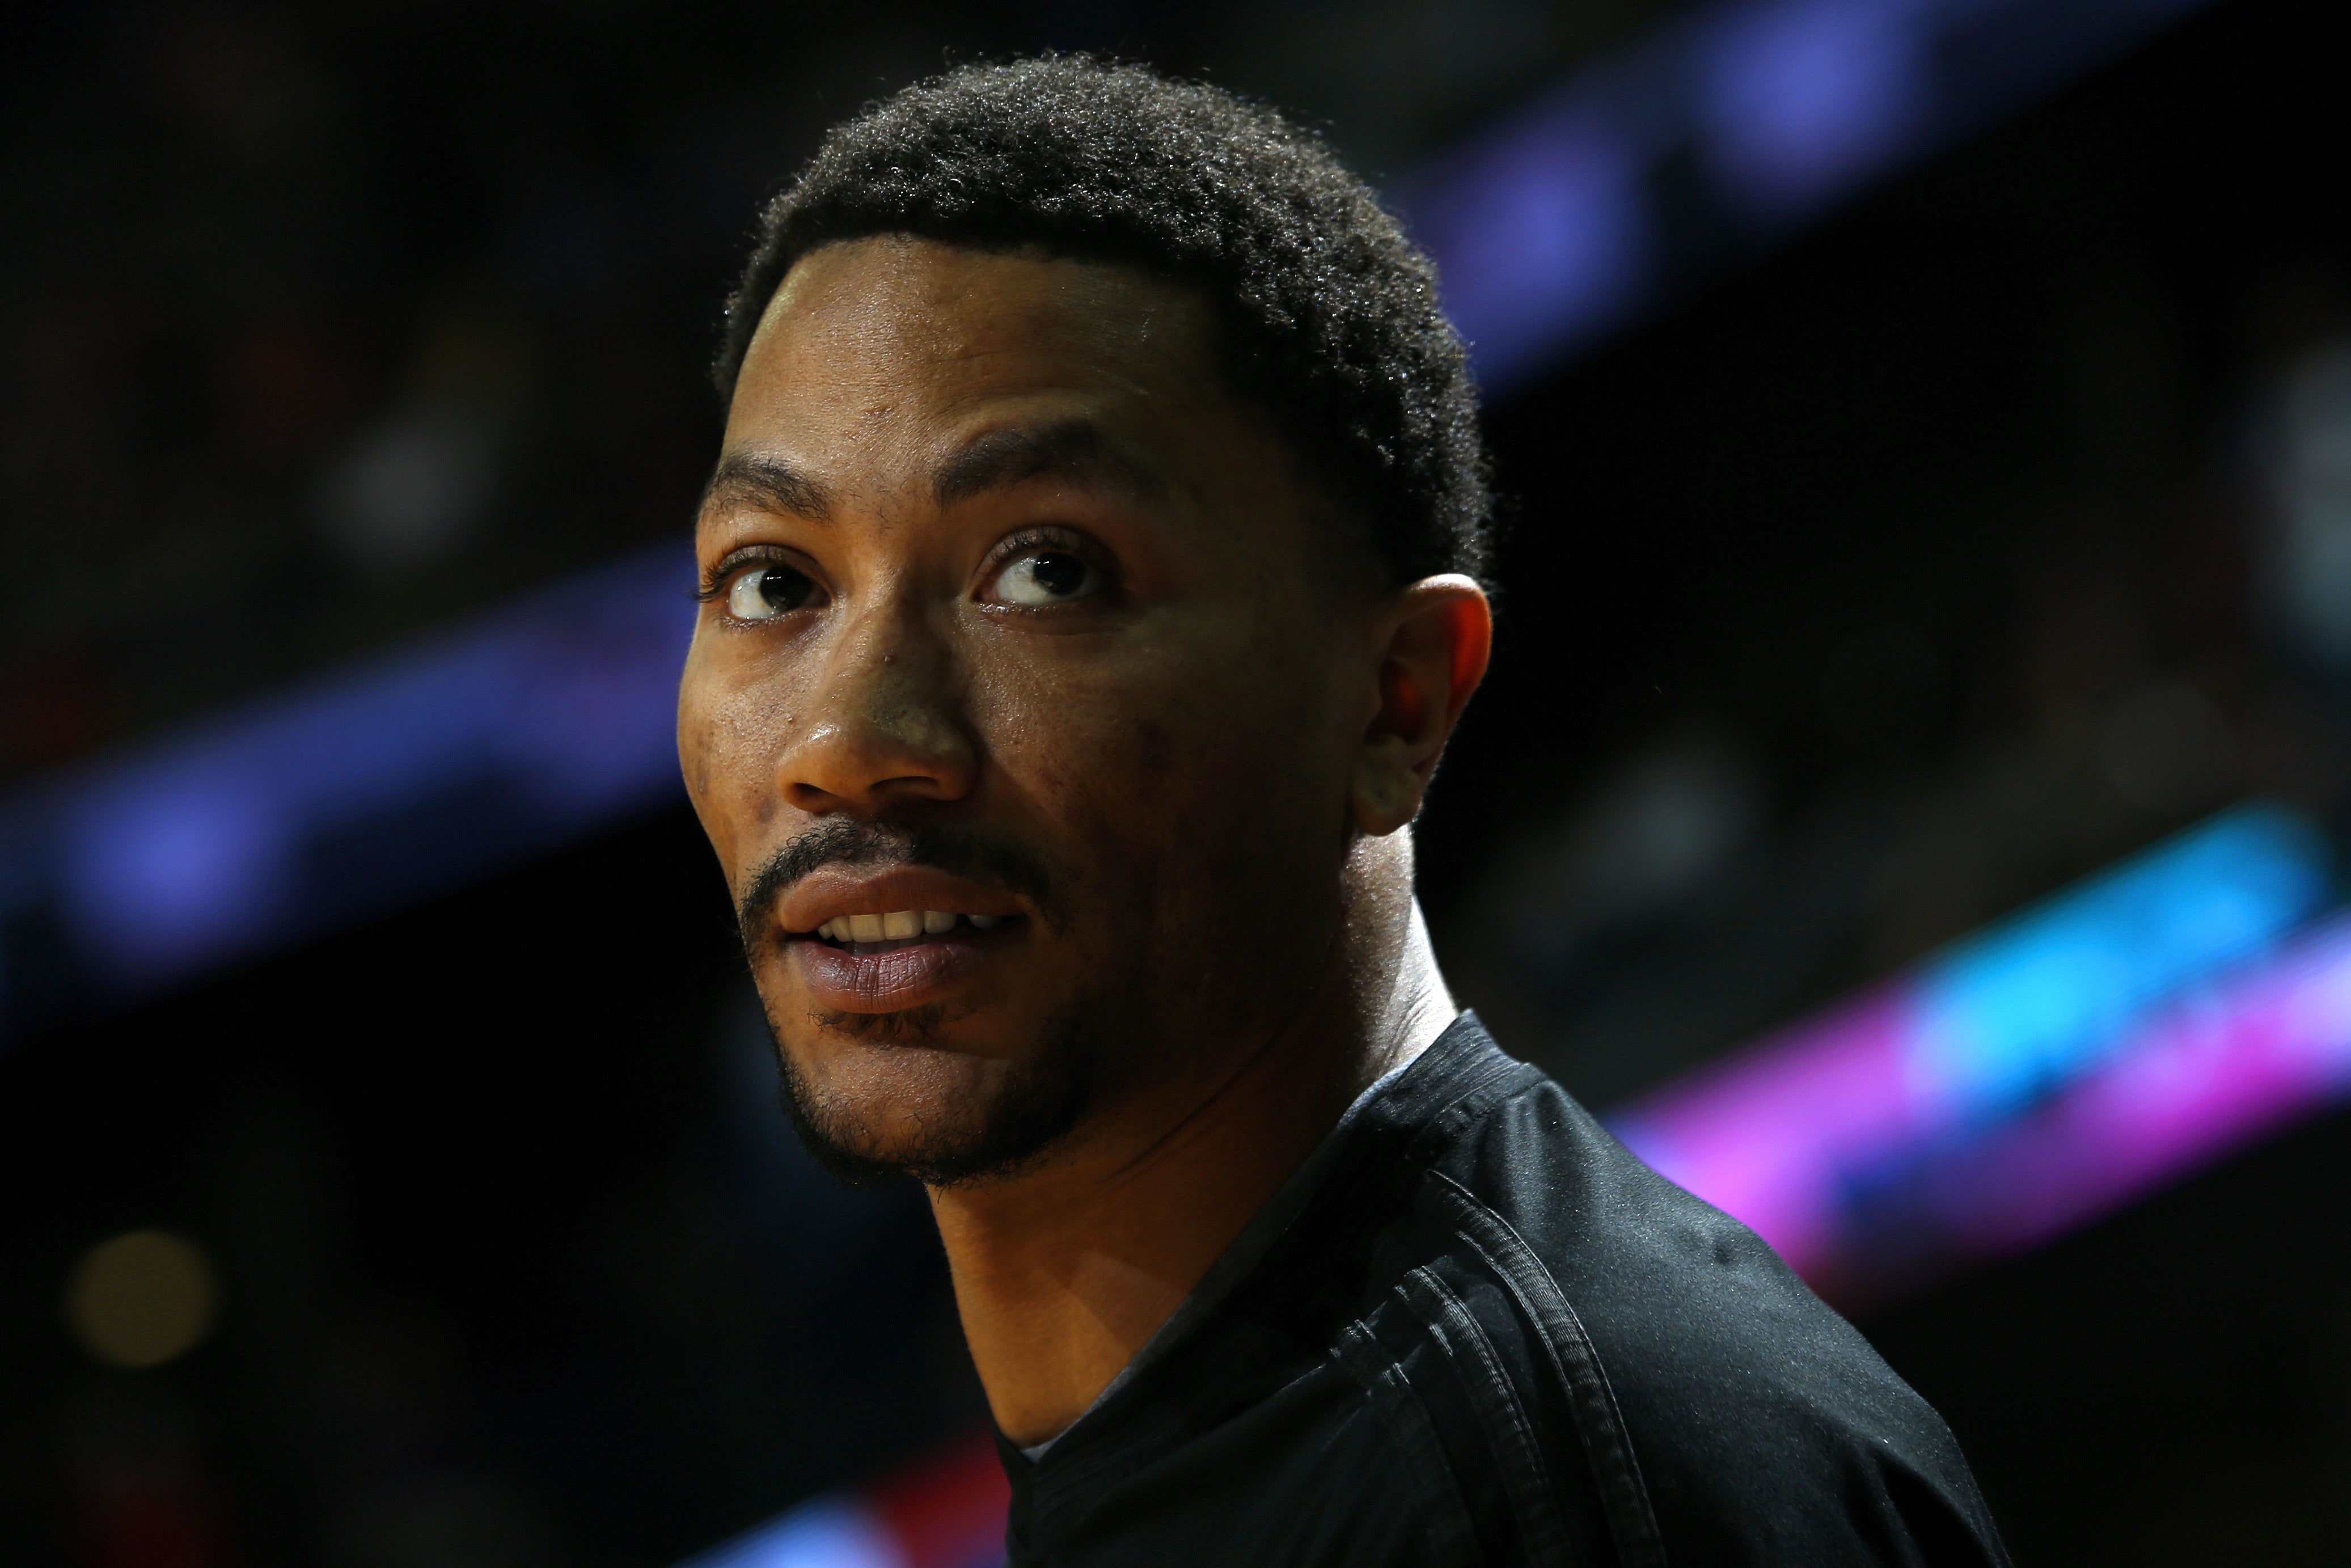 Derrick Rose Case Could Result In Mistrial Over New Text Messages
